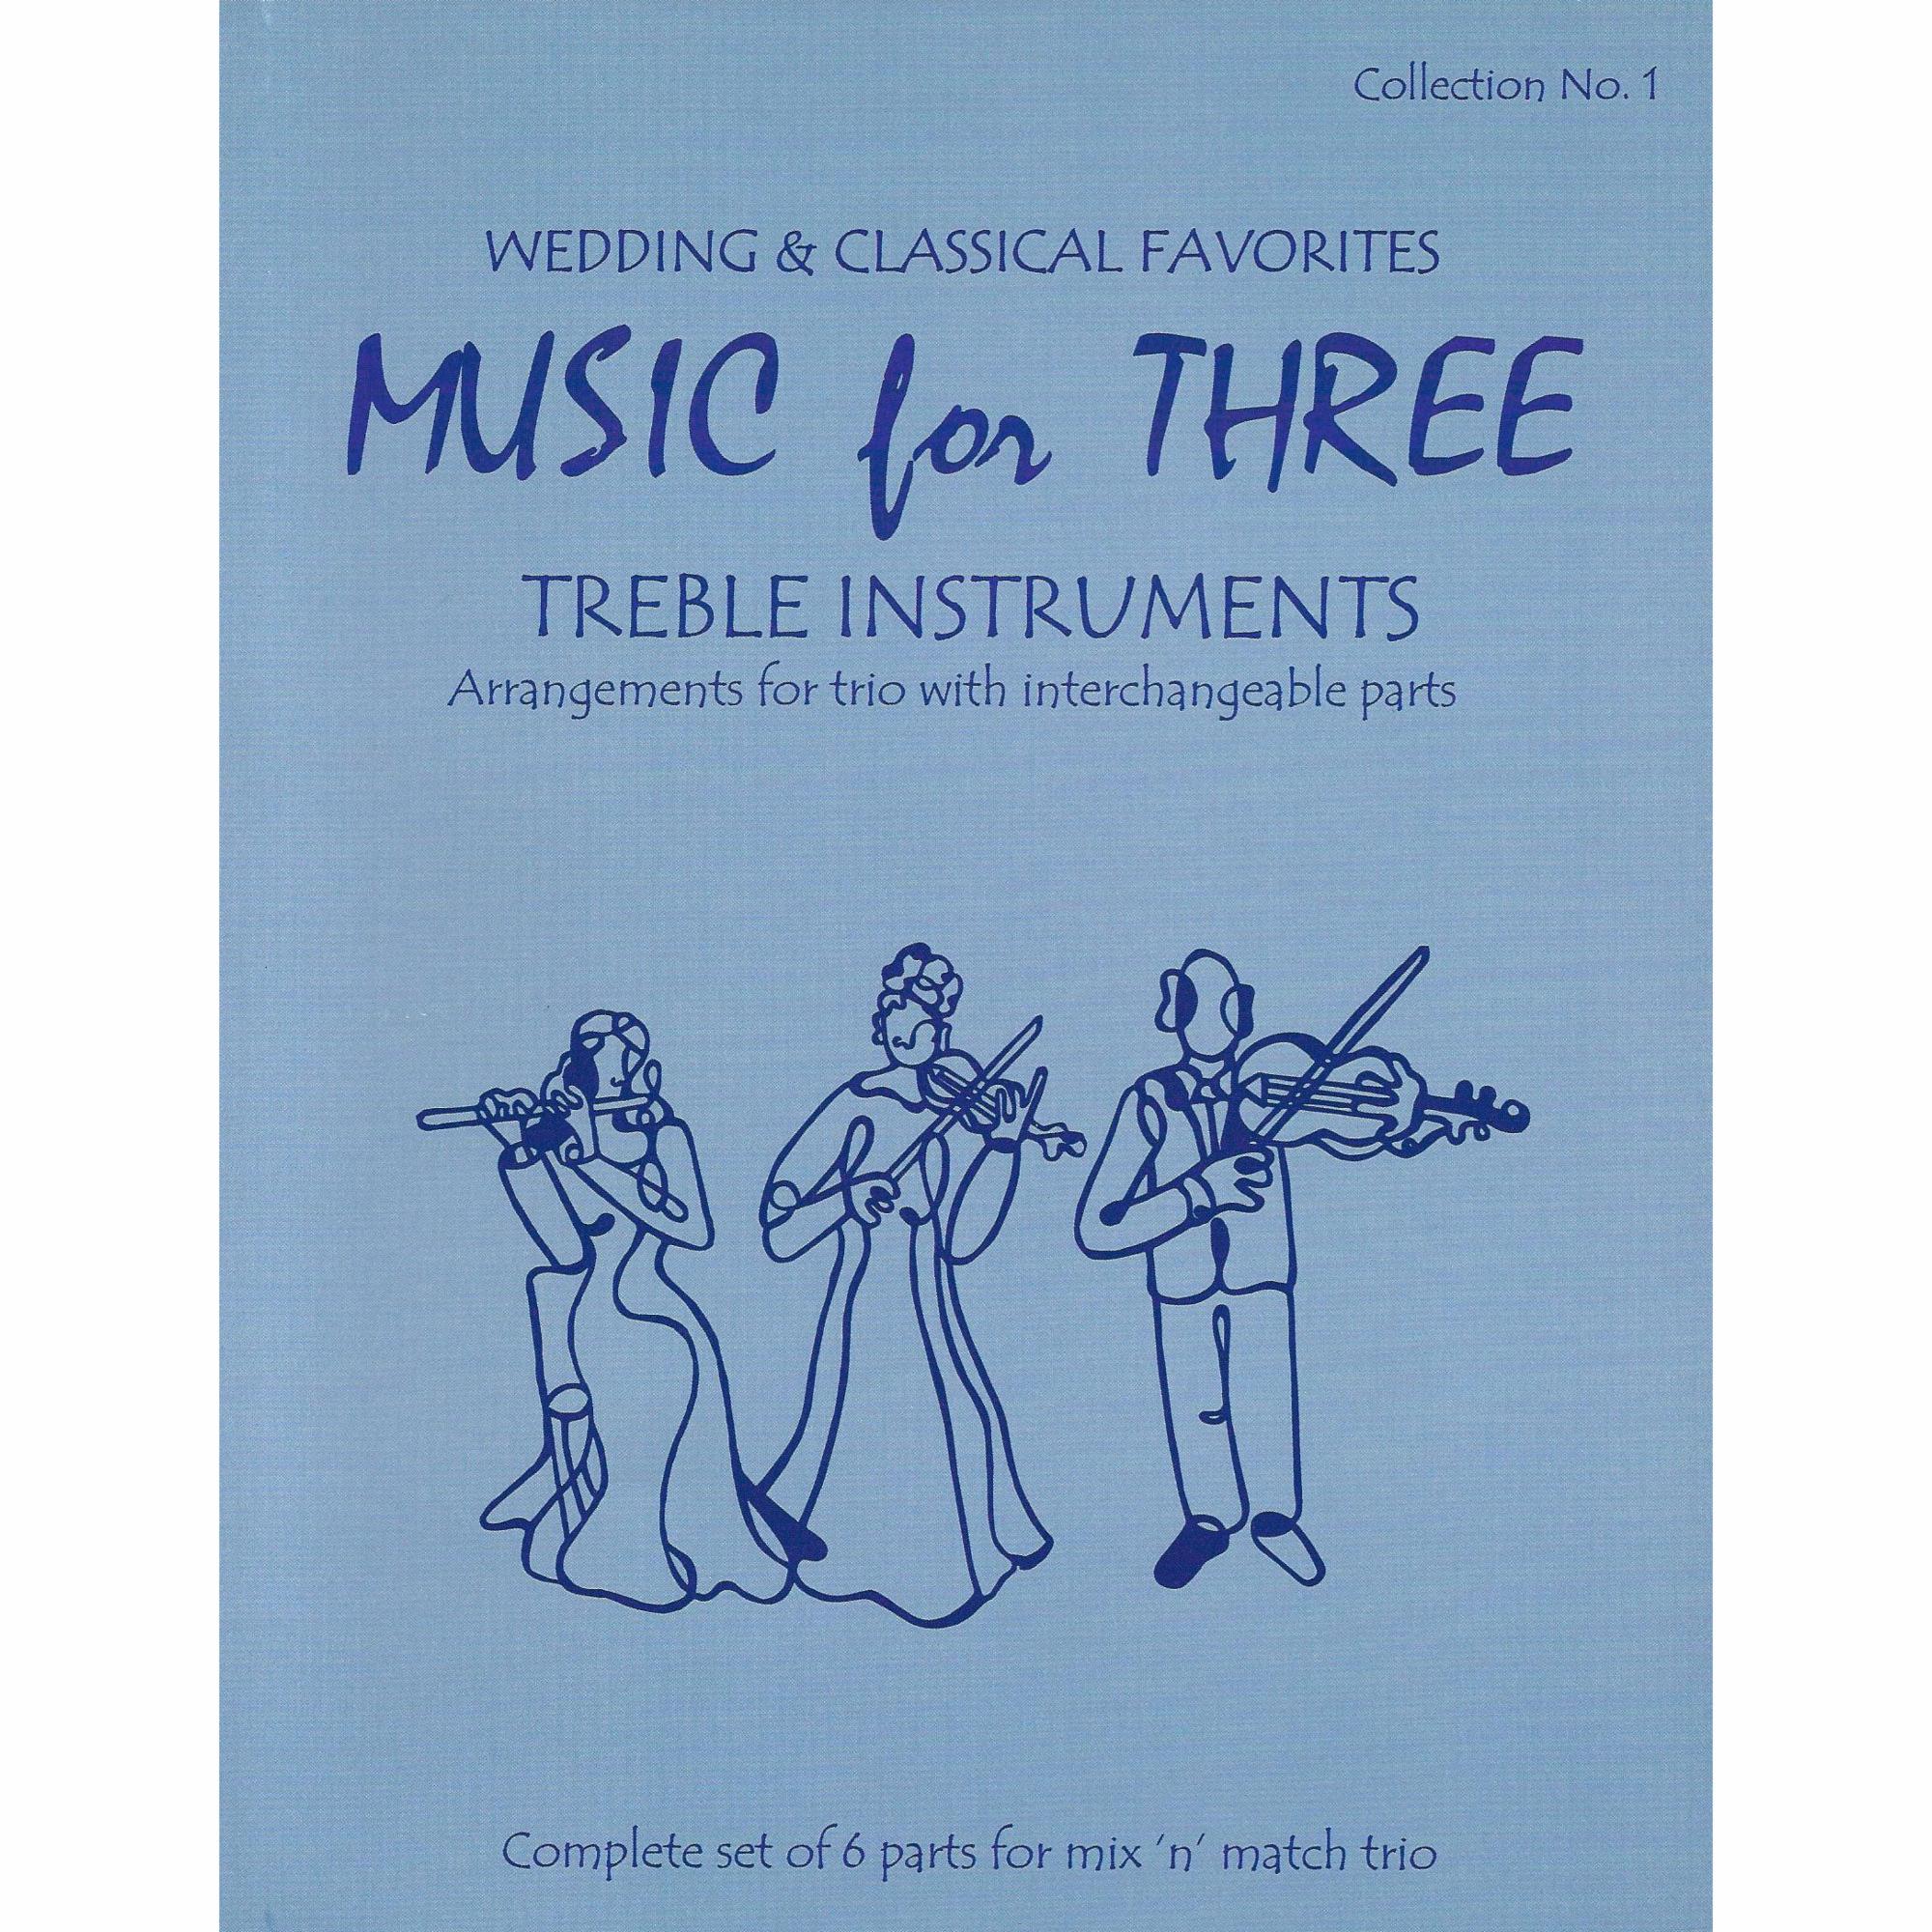 Music for Three Treble Instruments, Collection 1